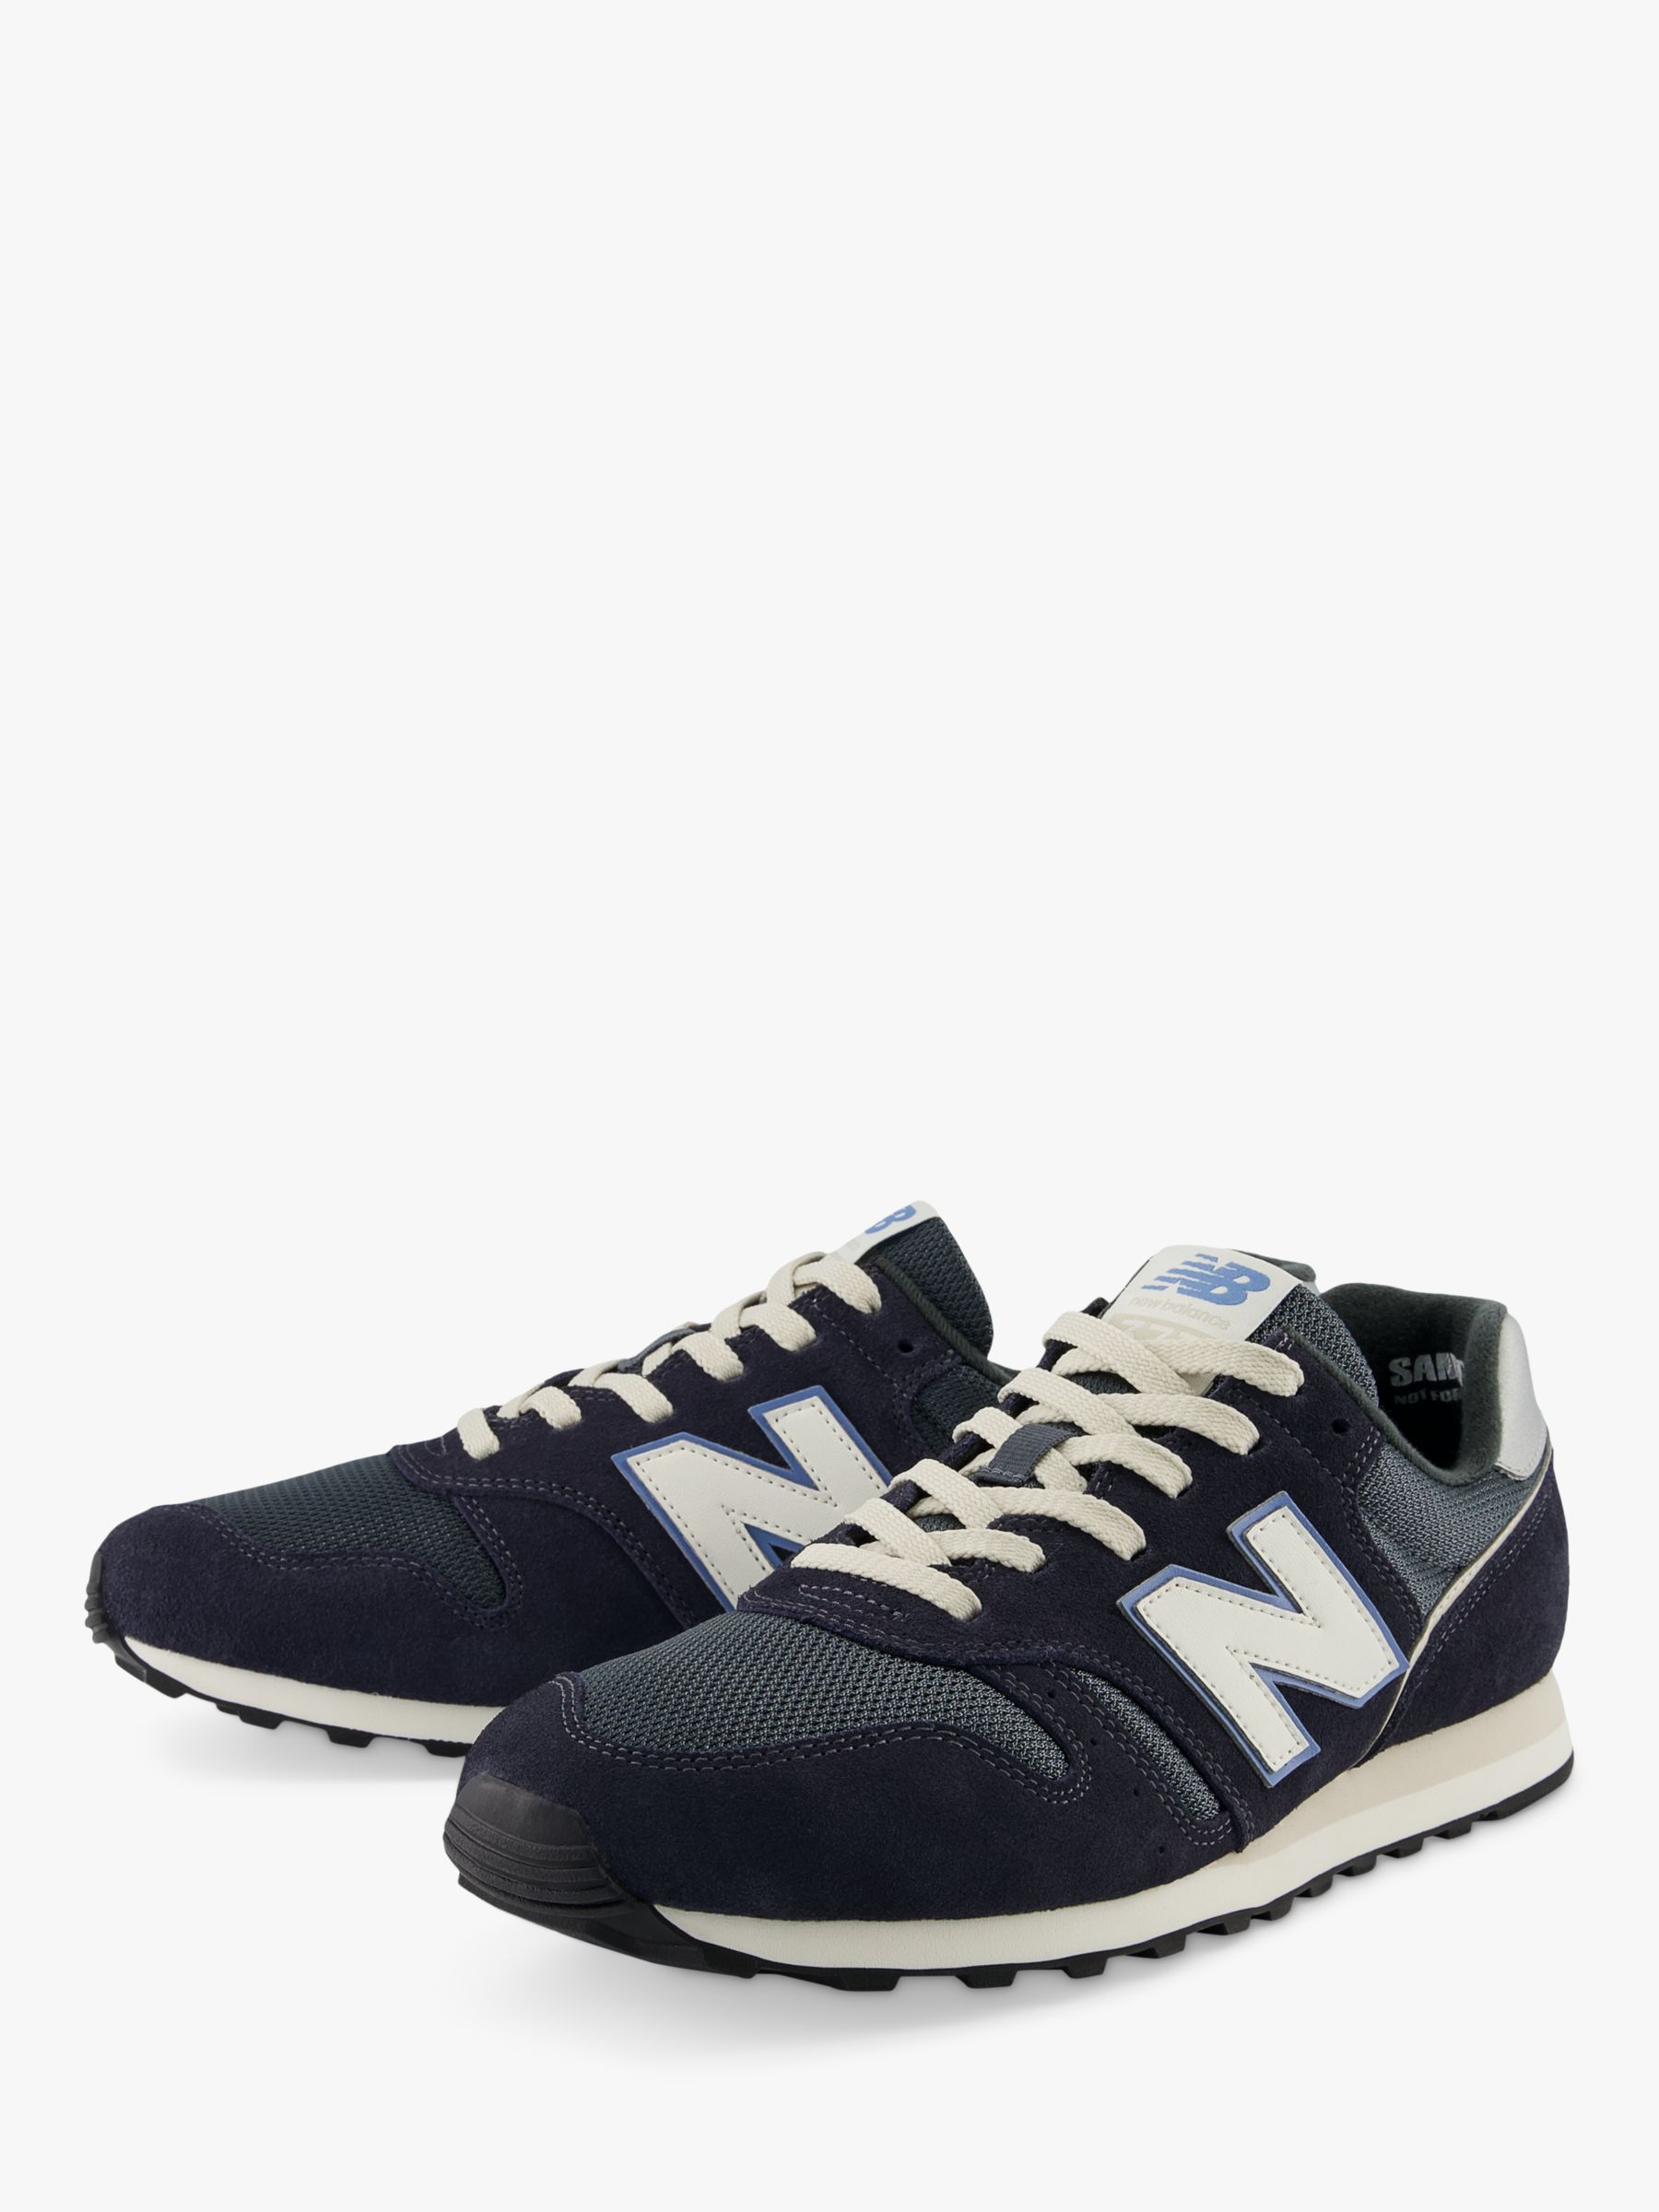 New Balance 373v2 Suede Trainers, Navy at John Lewis & Partners